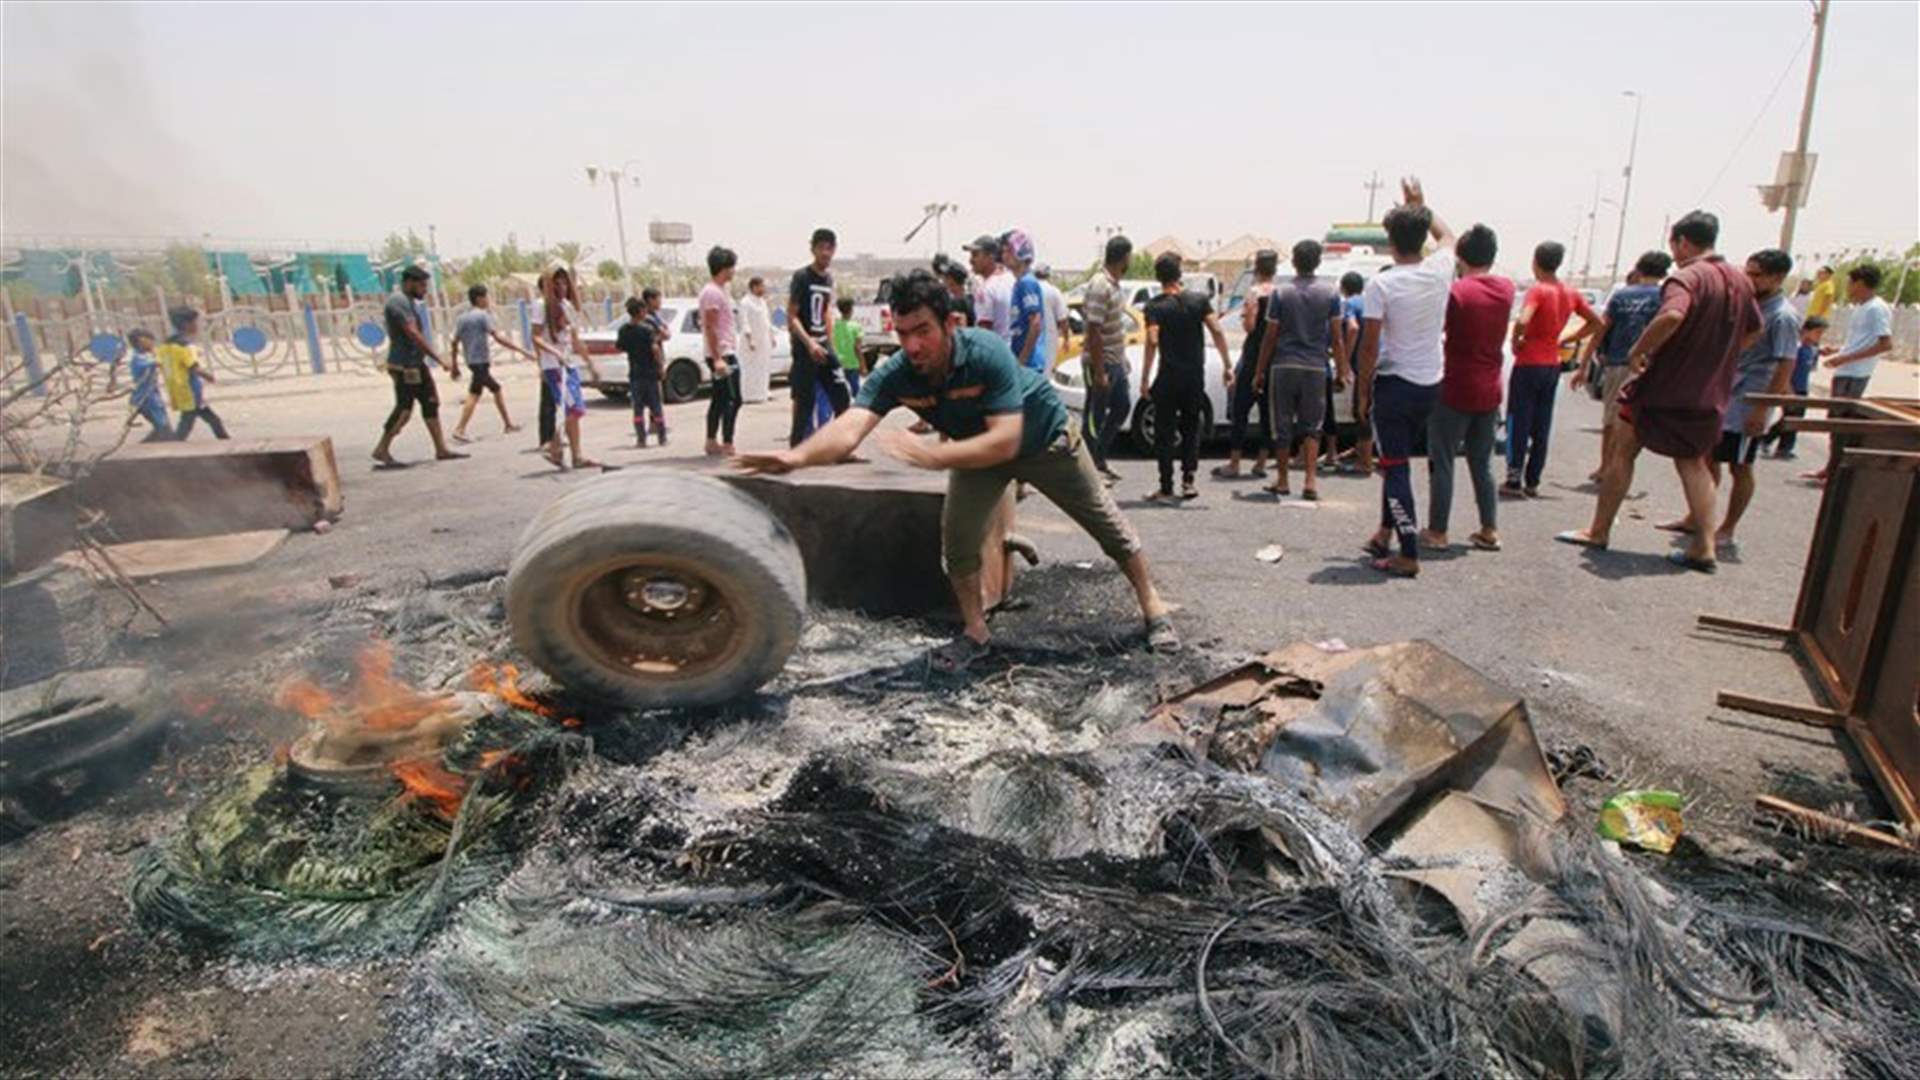 Iraq police fire in air as protesters try to storm Basra govt building